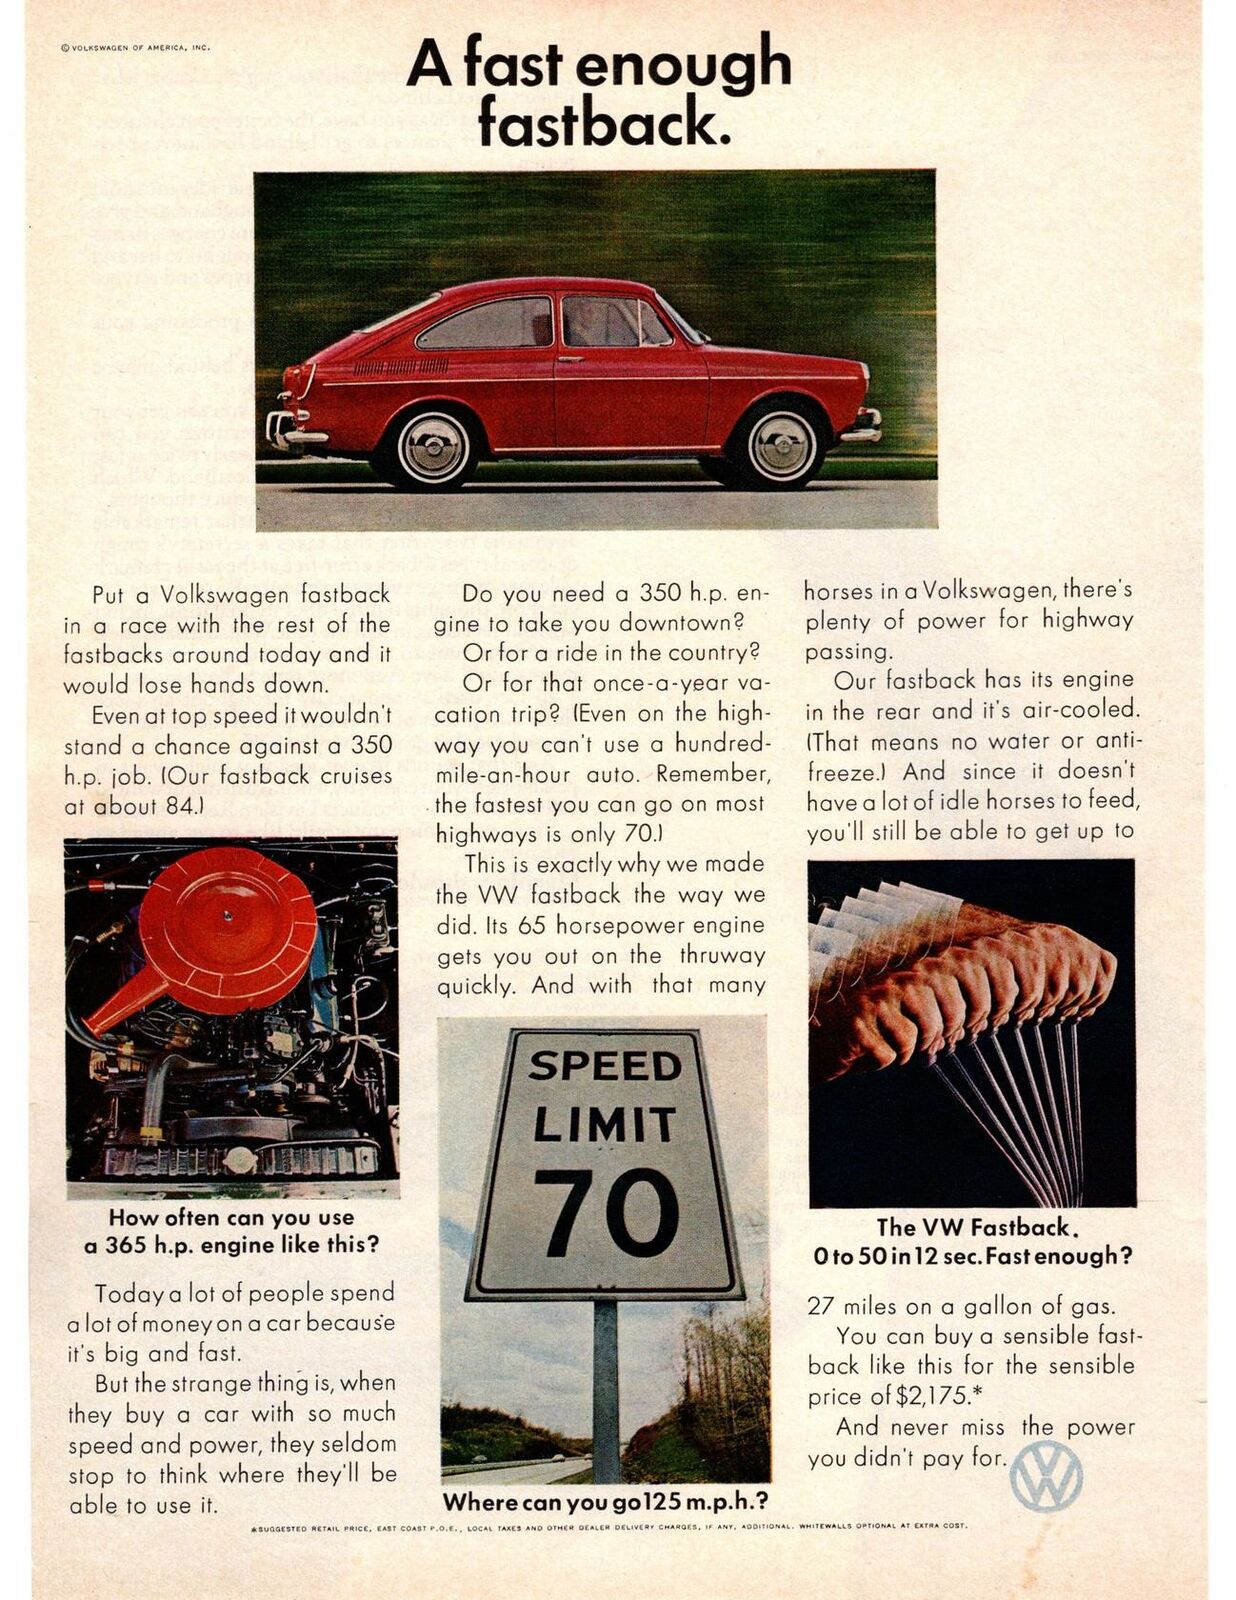 1968 Vw Volkswagen Type 3 1600 Fastback 27 Mpg Speed Limit Sign 70 Mph Print Ad